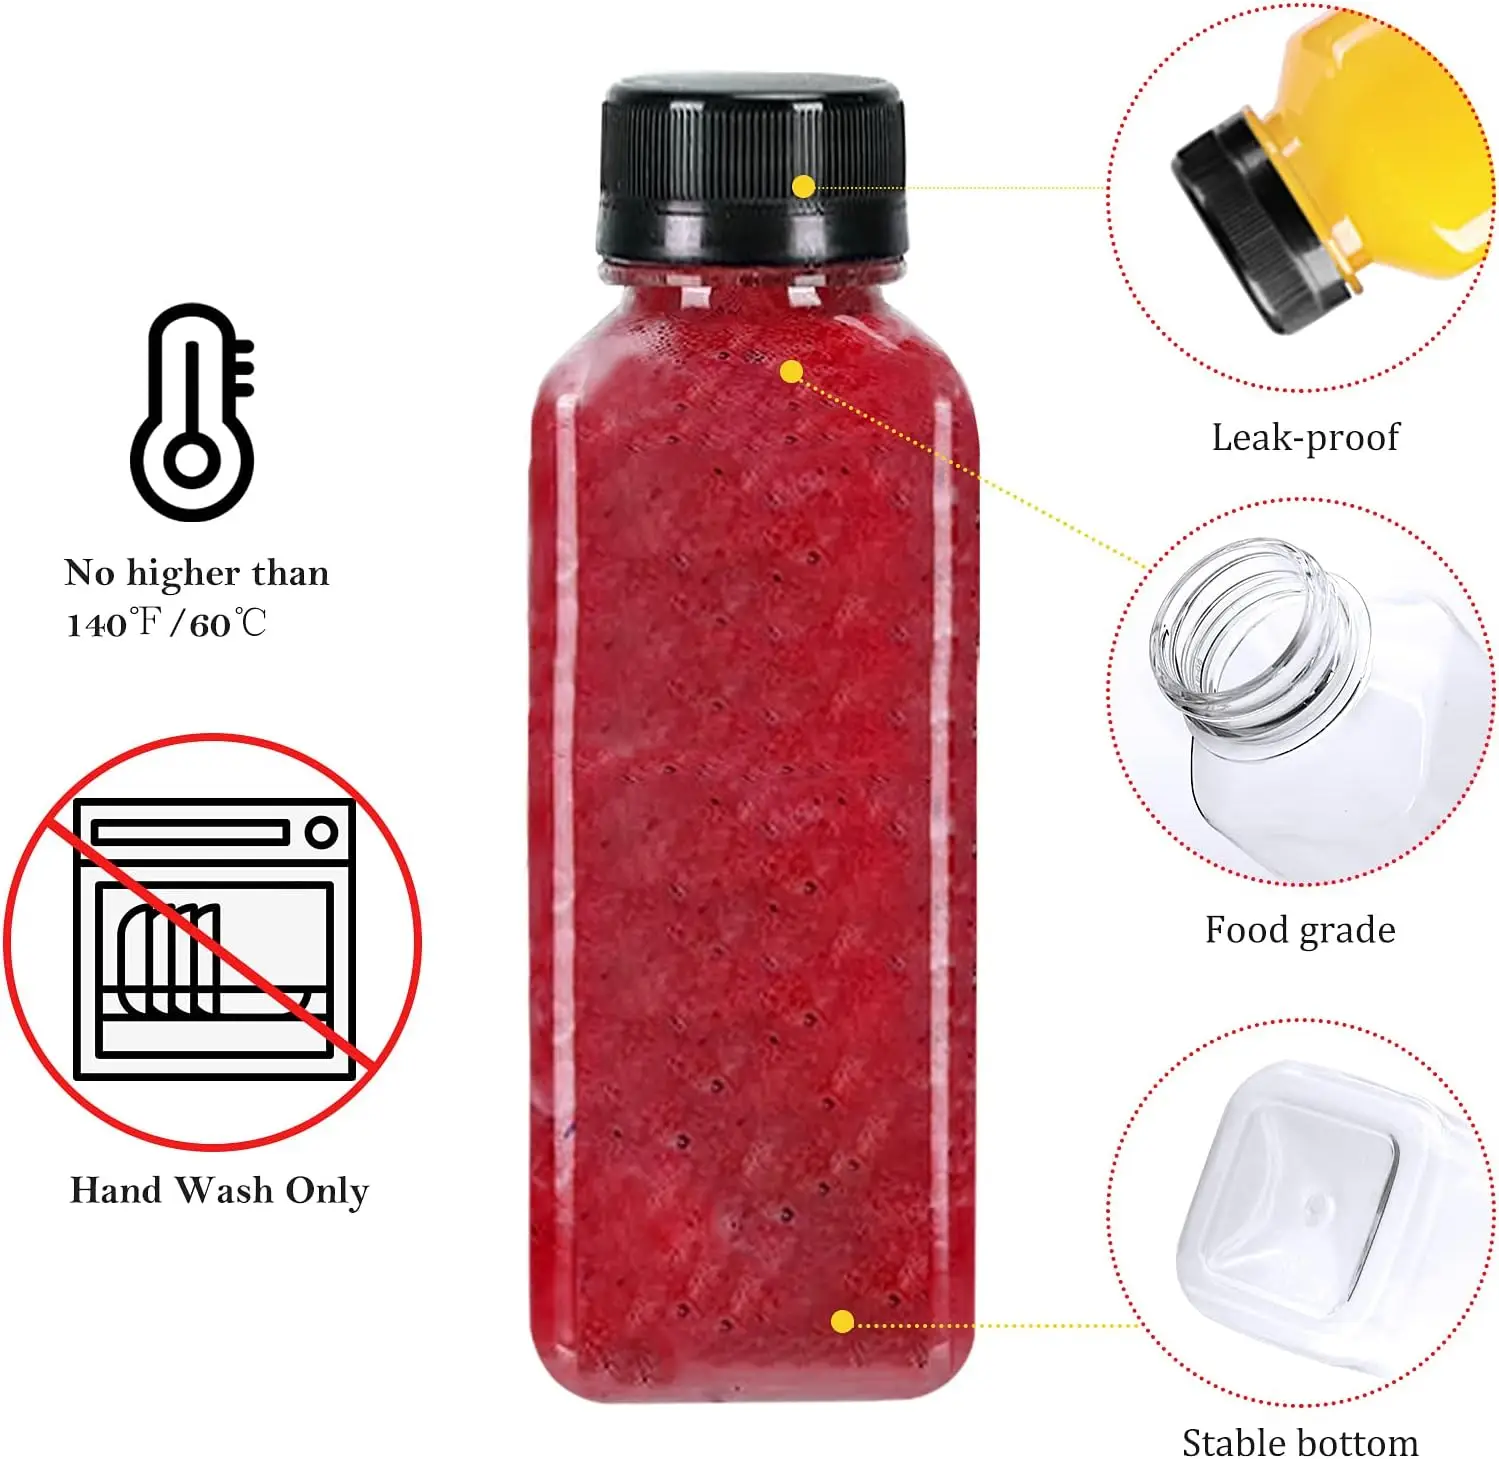 https://ae01.alicdn.com/kf/S774a7124c0ee4464b4e913ffb0e2d60eI/16Oz-Plastic-Bottles-with-Caps-Juice-Bottles-Clear-Reusable-Containers-Black-Lid-Plastic-Smoothie-Bottles-Ideal.jpg